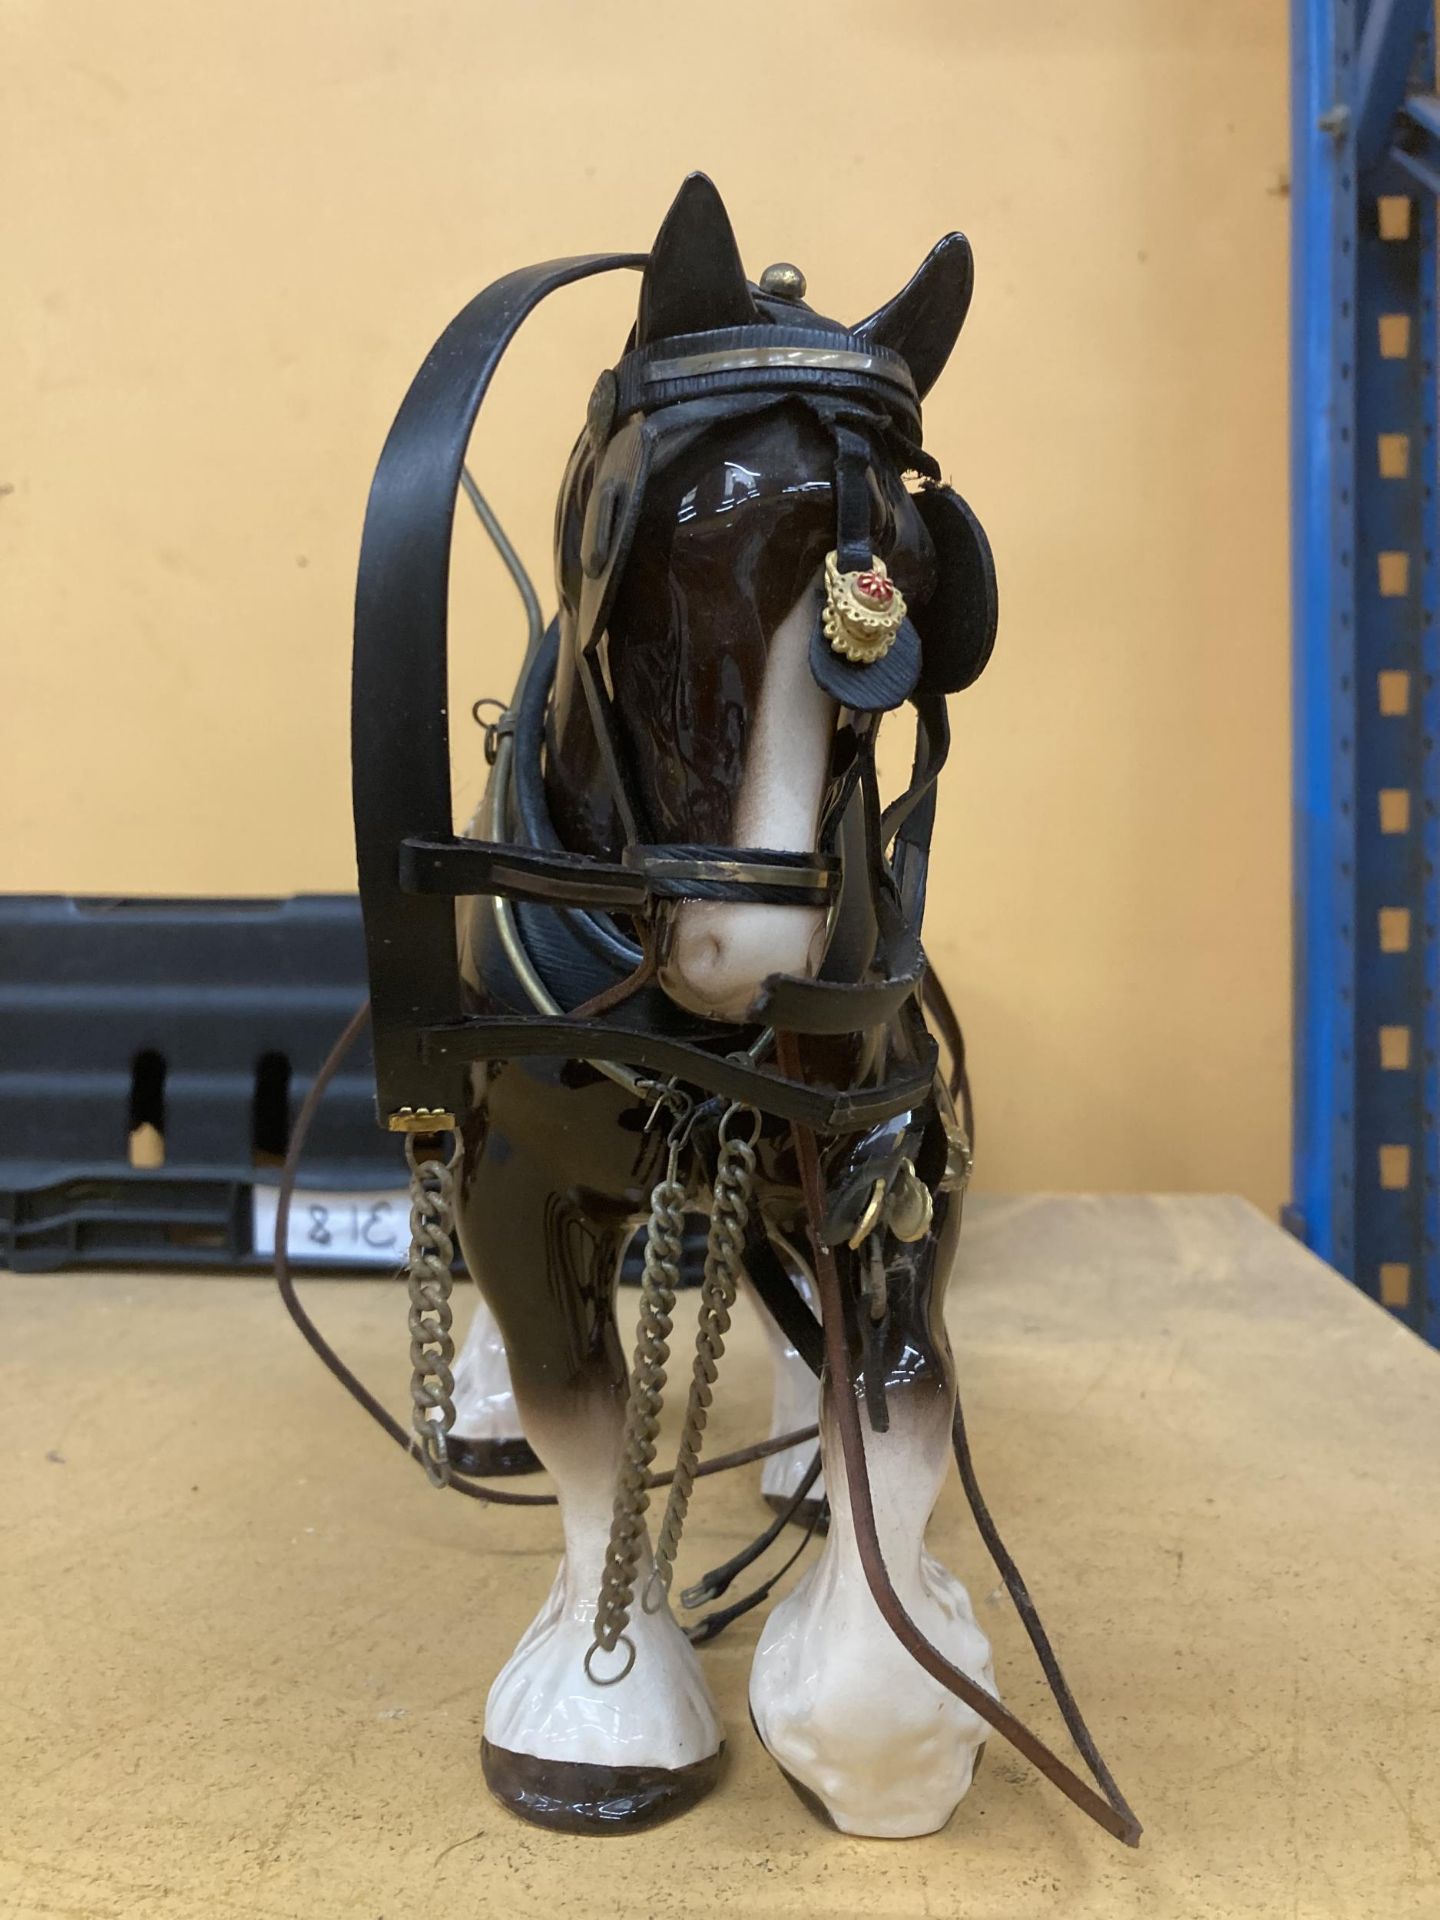 A VINTAGE CERAMIC SHIRE HORSE FIGURE WITH TACK ACCESSORIES - Image 3 of 3